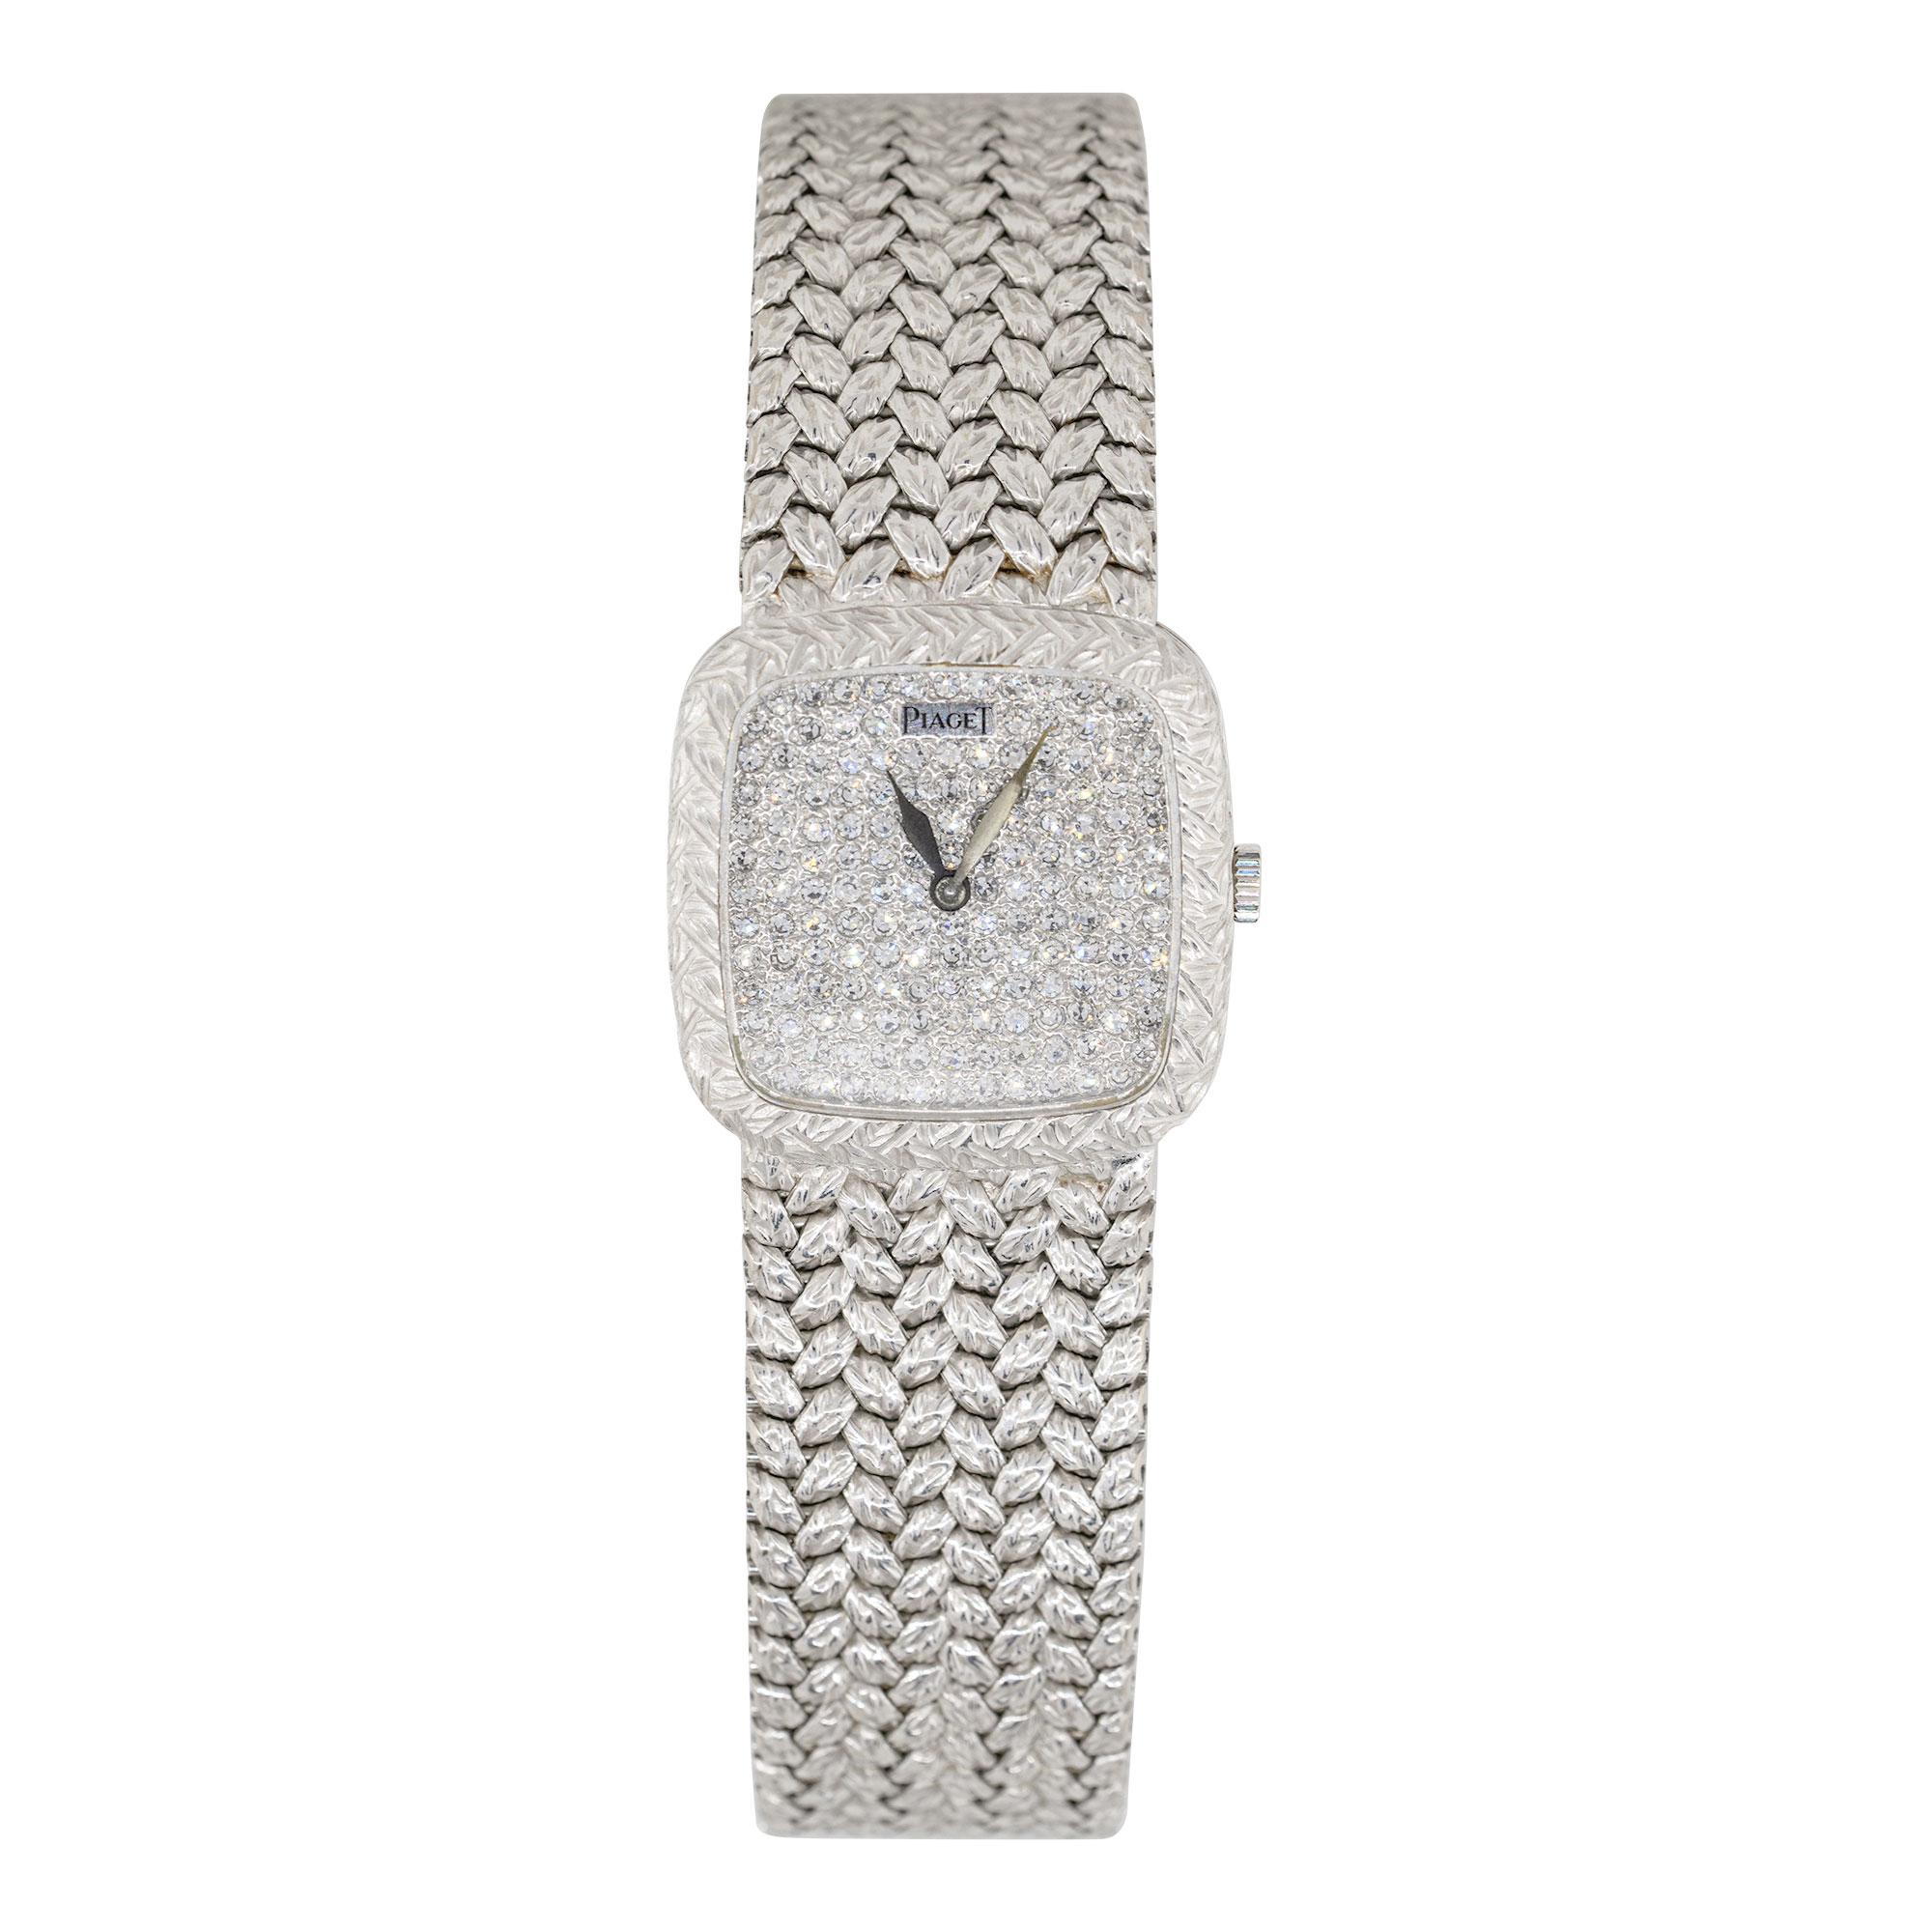 Brand: Piaget
Case Material: 18k White Gold
Case Diameter: 22mm
Crystal: Plastic
Bezel: Textured 18k white gold bezel
Dial: Diamond pave dial with silver hands
Bracelet: 18k White Gold Bracelet
Size: Will fit a 5.5